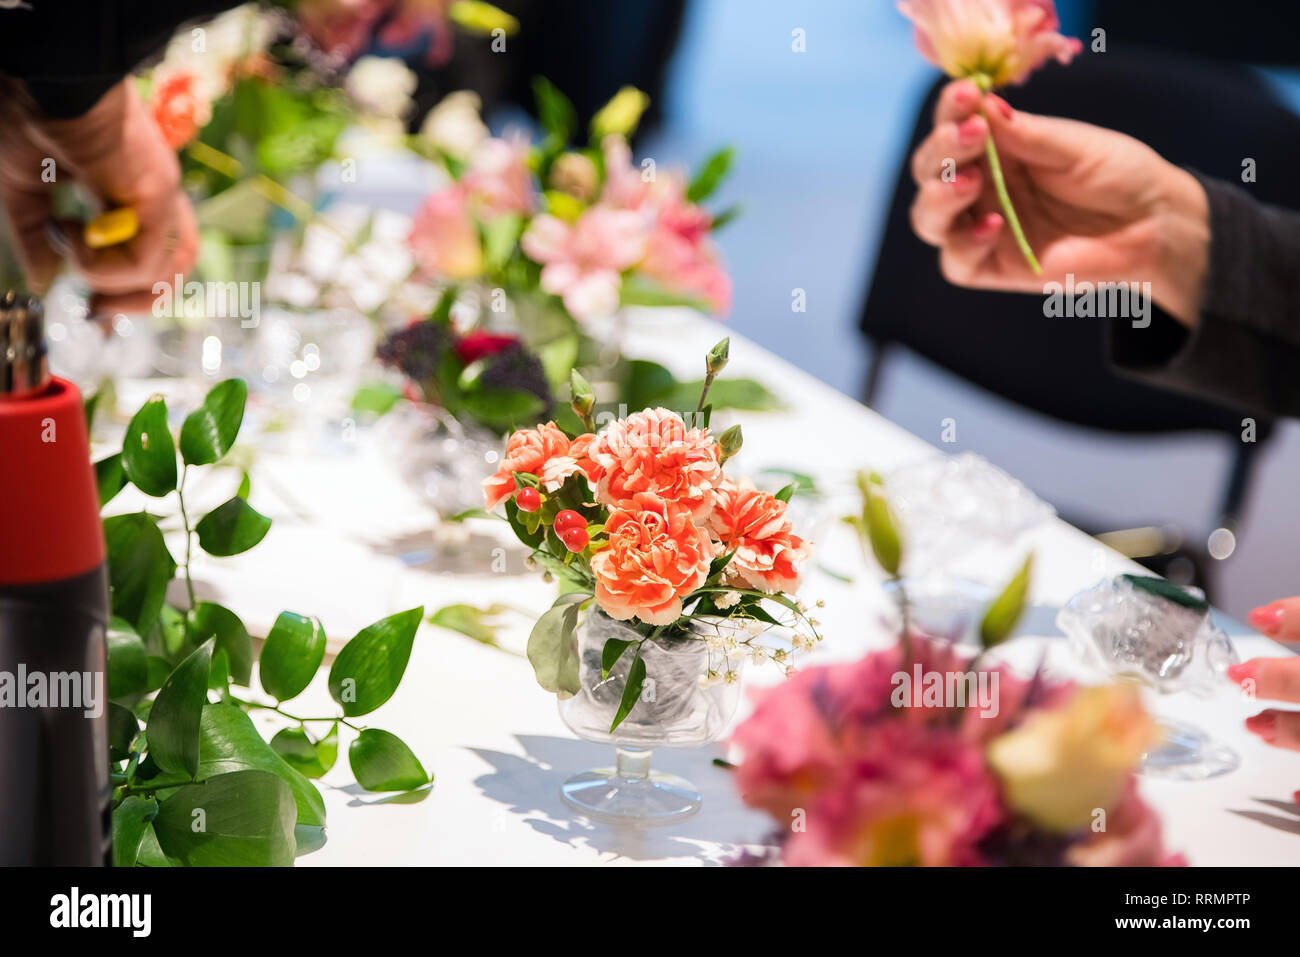 Closeup of hands of young woman florist creating bouquet of pink flowers on the table Stock Photo